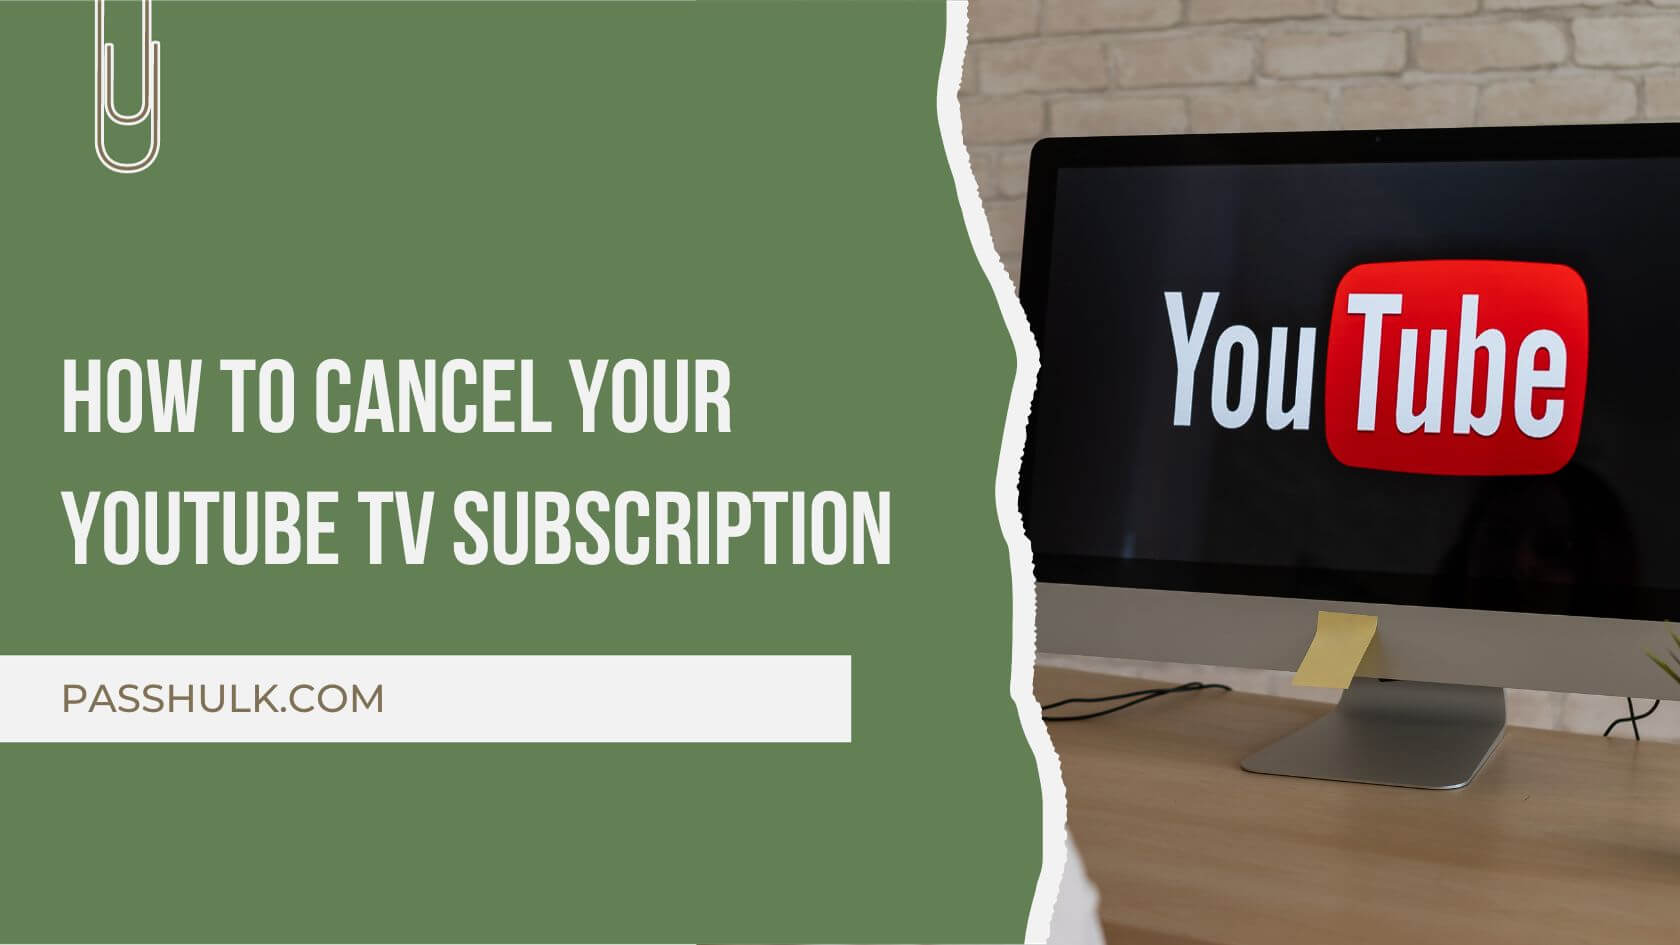 How To Cancel Your YouTube TV Subscription